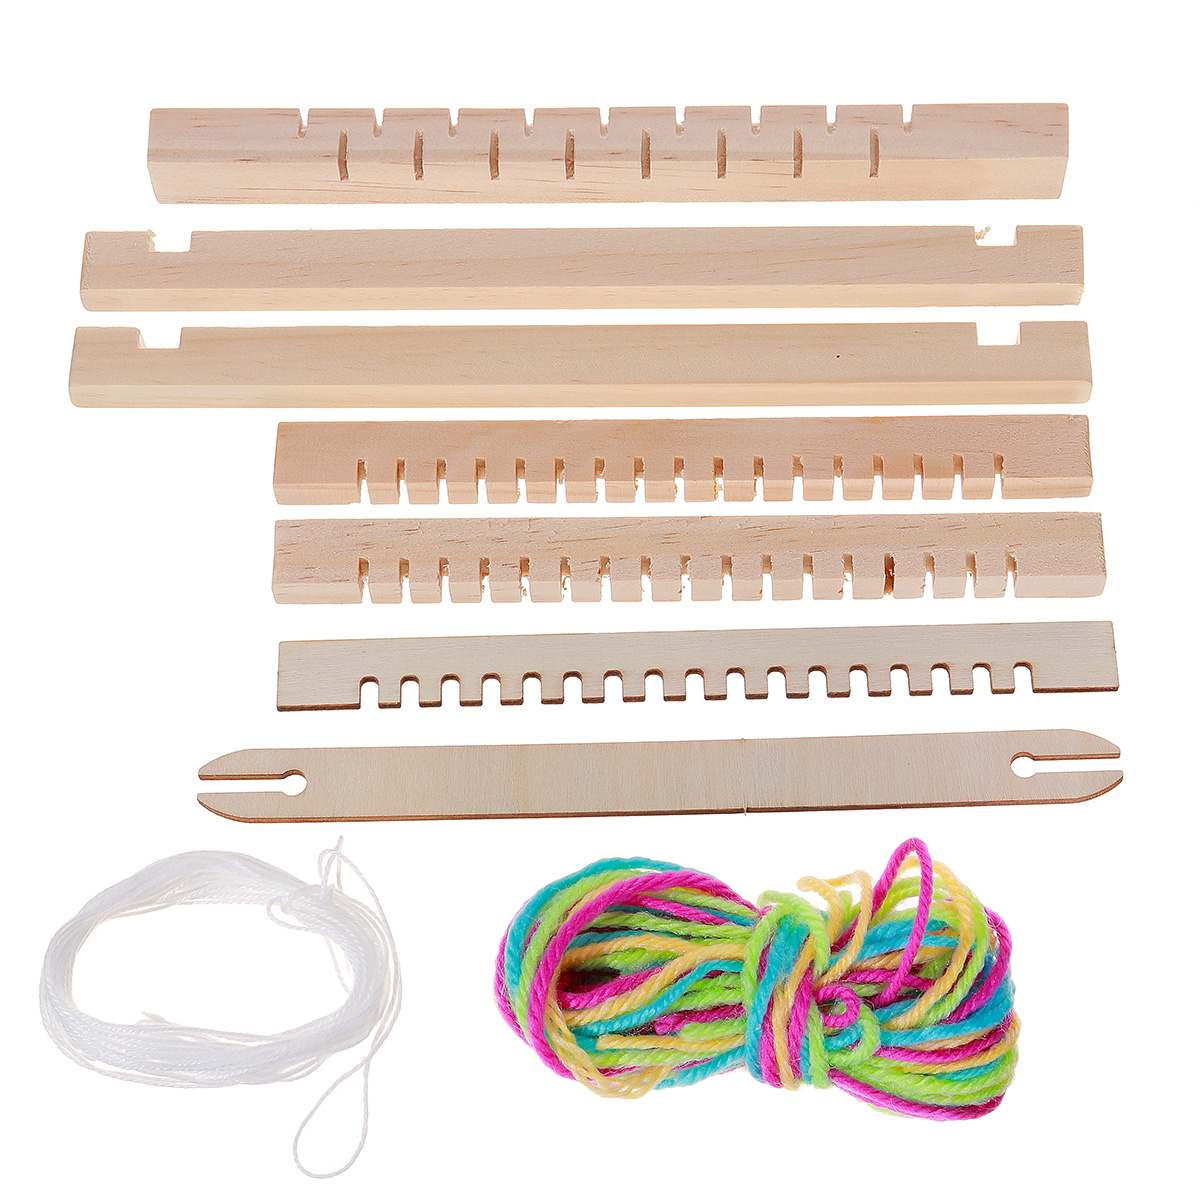 DIY-Knitting-Beginner-Mini-Sewing-Tool-is-Easy-to-Assemble-and-Simple-Manual-Knitting-Machine-1909996-1